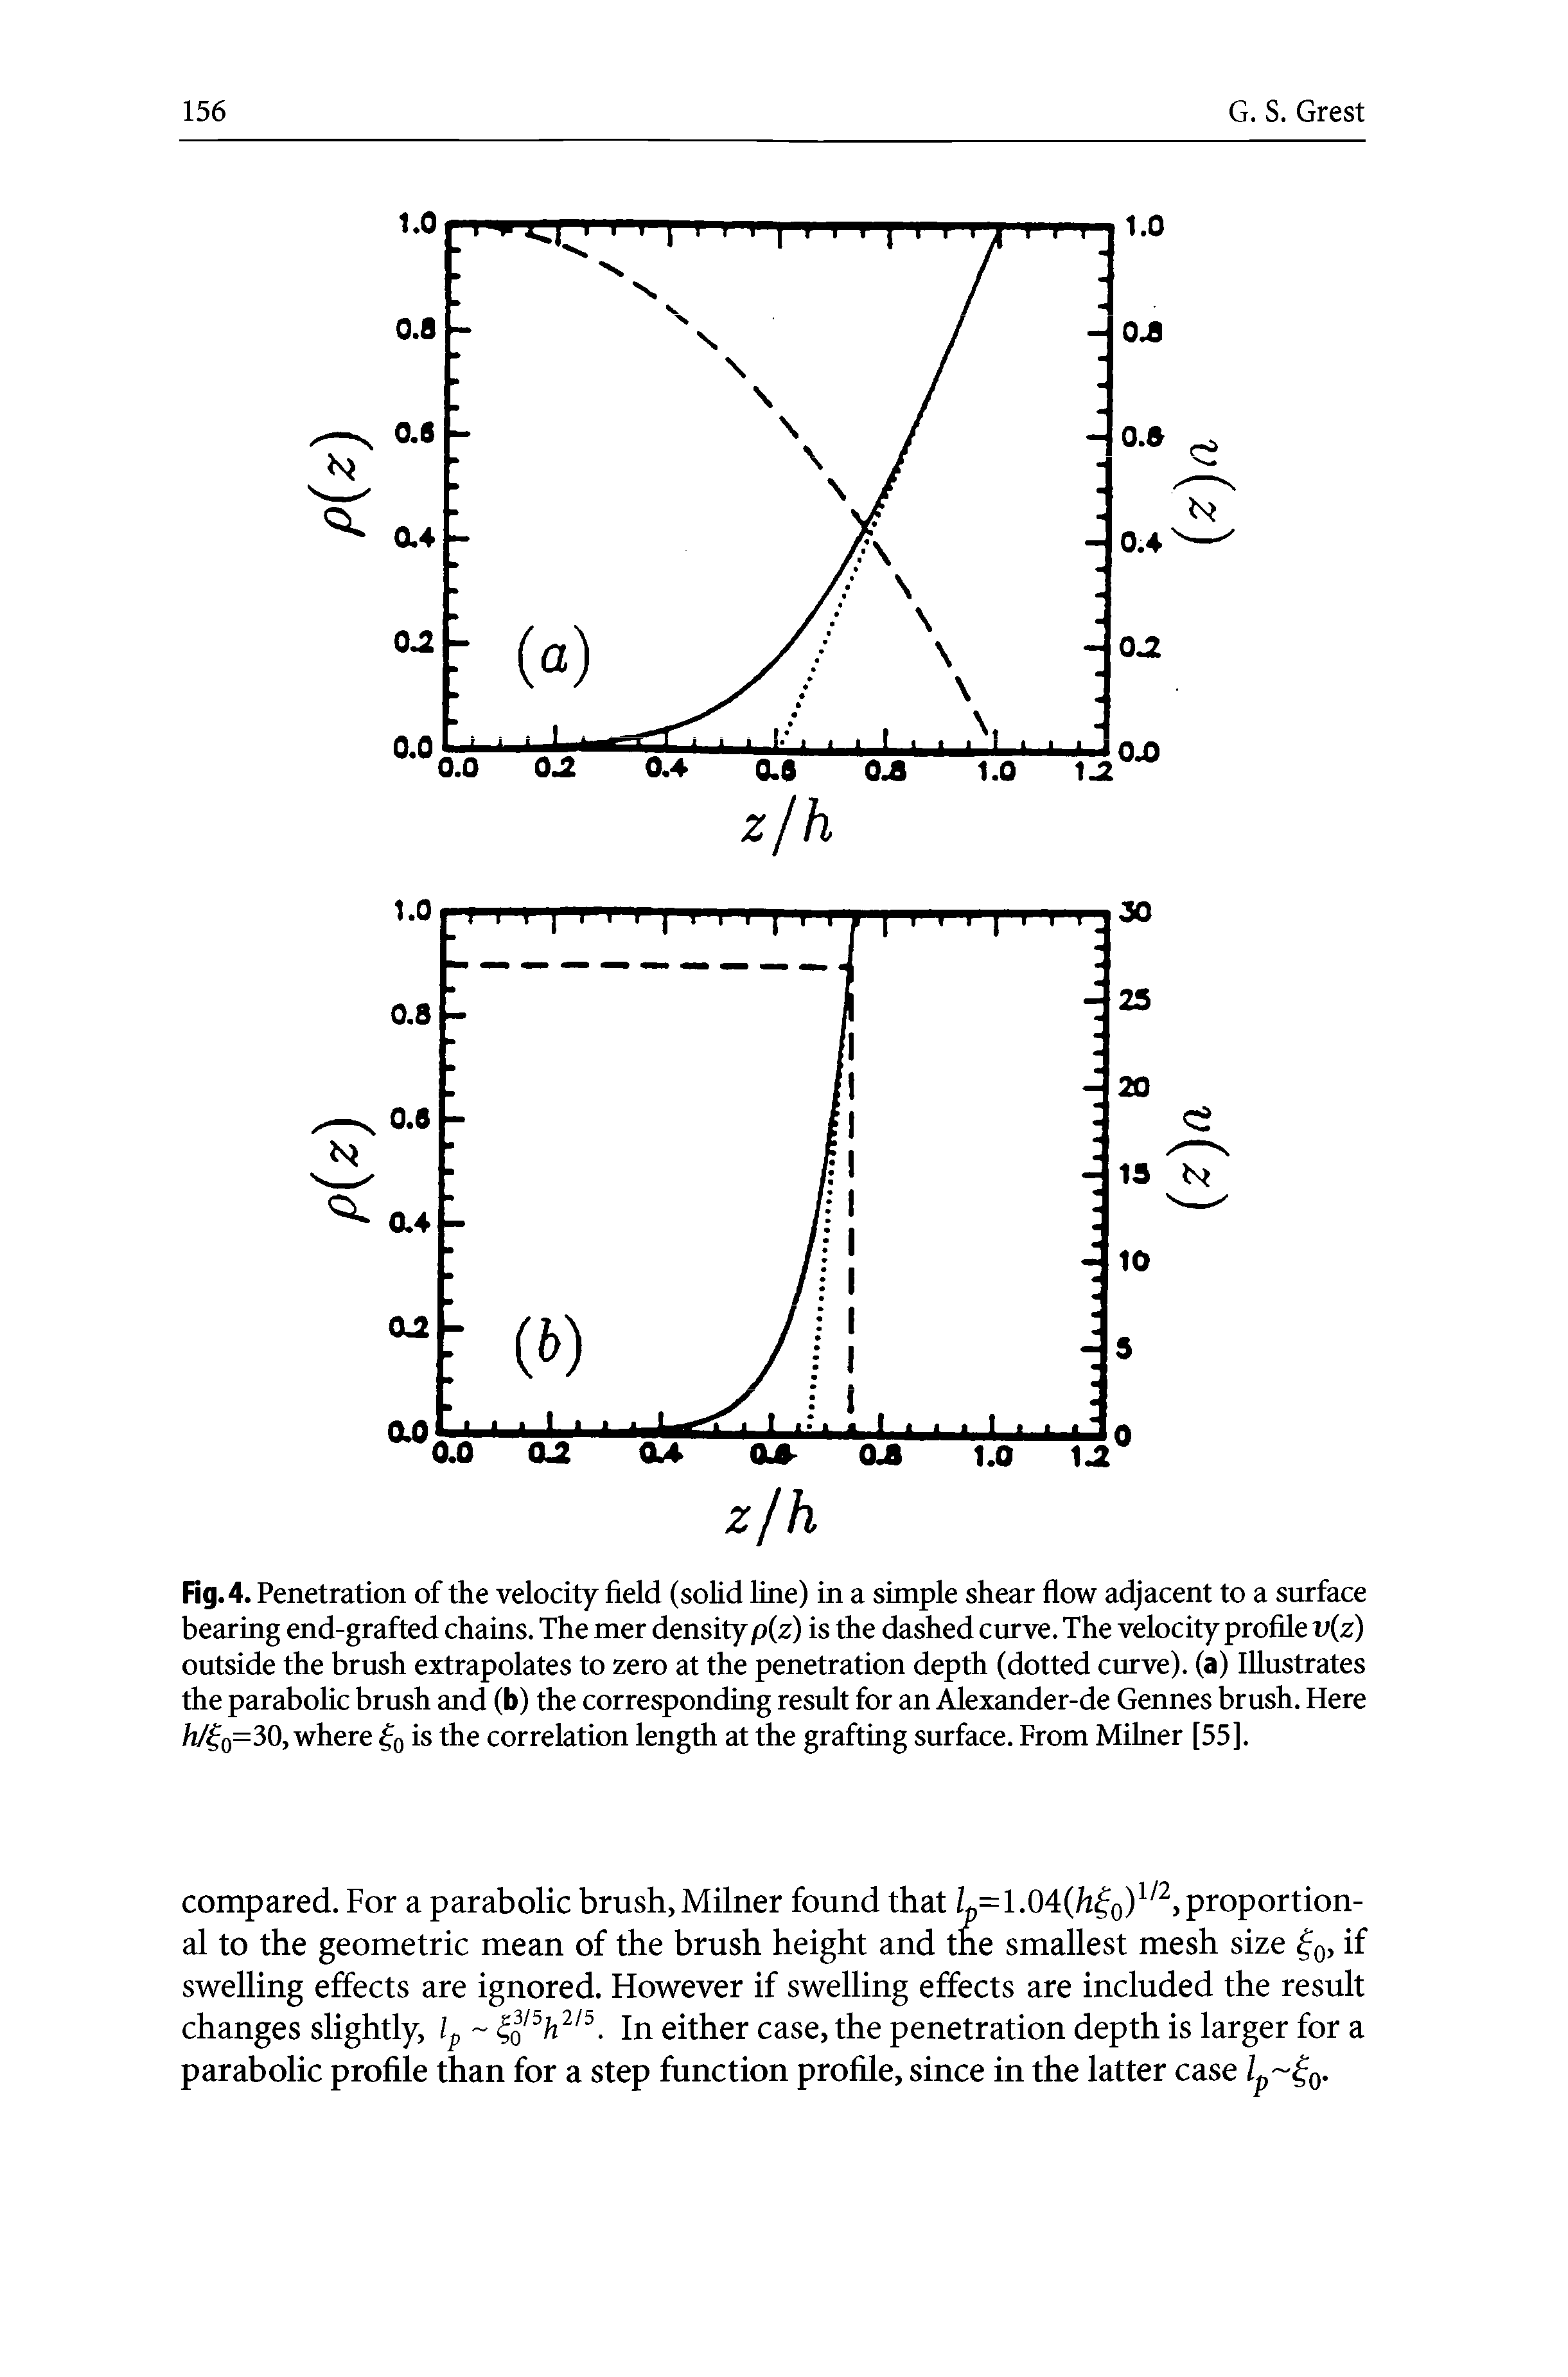 Fig. 4. Penetration of the velocity field (solid line) in a simple shear flow adjacent to a surface bearing end-grafted chains. The mer density p(z) is the dashed curve. The velocity profile v(z) outside the brush extrapolates to zero at the penetration depth (dotted curve), (a) Illustrates the parabolic brush and (b) the corresponding result for an Alexander-de Gennes brush. Here fi/ 0=30, where 0 is the correlation length at the grafting surface. From Milner [55].